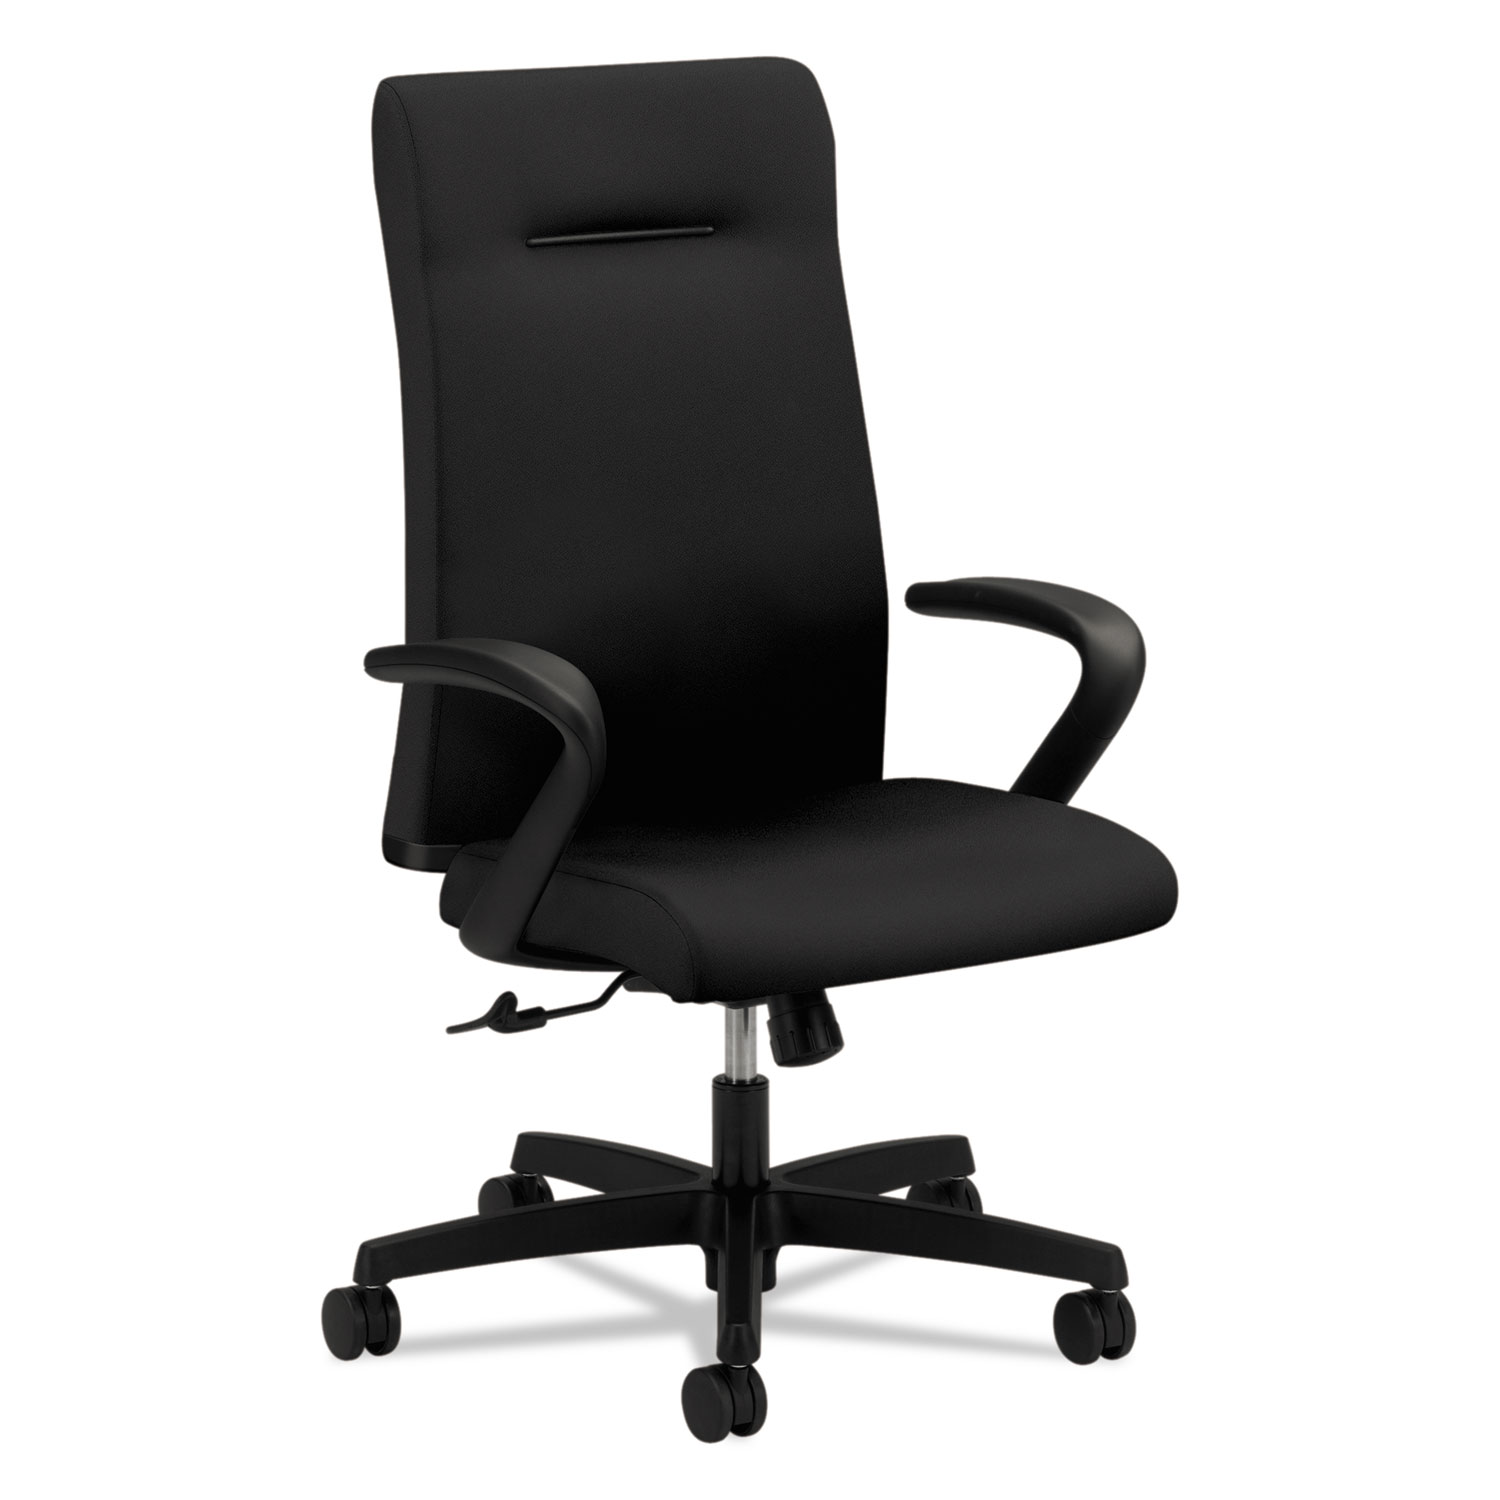 Ignition Series Executive High-Back Chair, Black